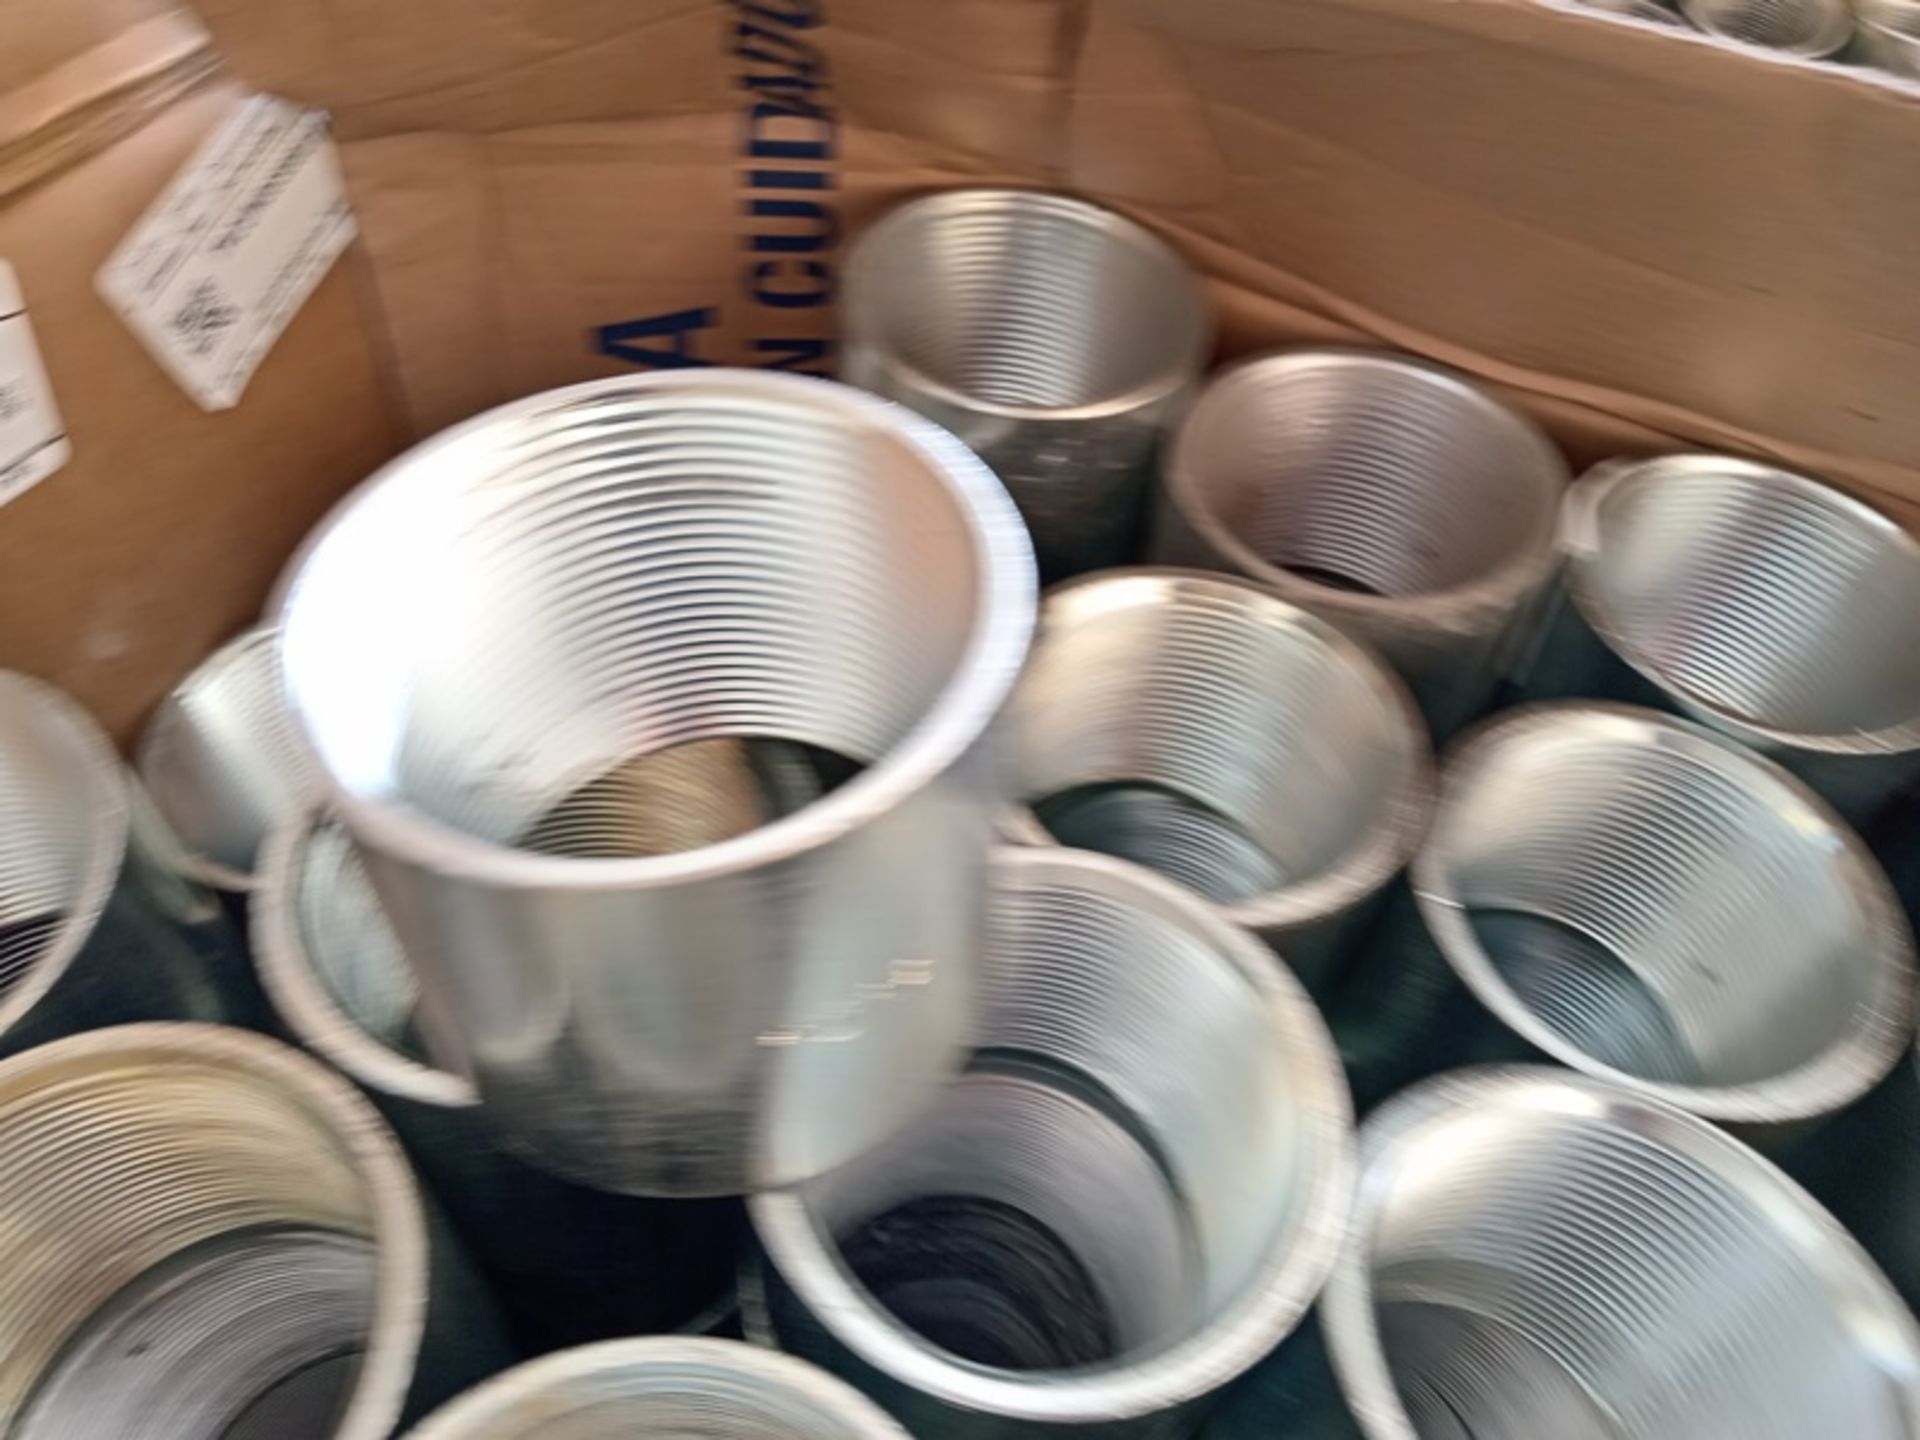 LOT OF (416) PCS OF GALVANIZED UNION COUPLINGS - Image 6 of 6